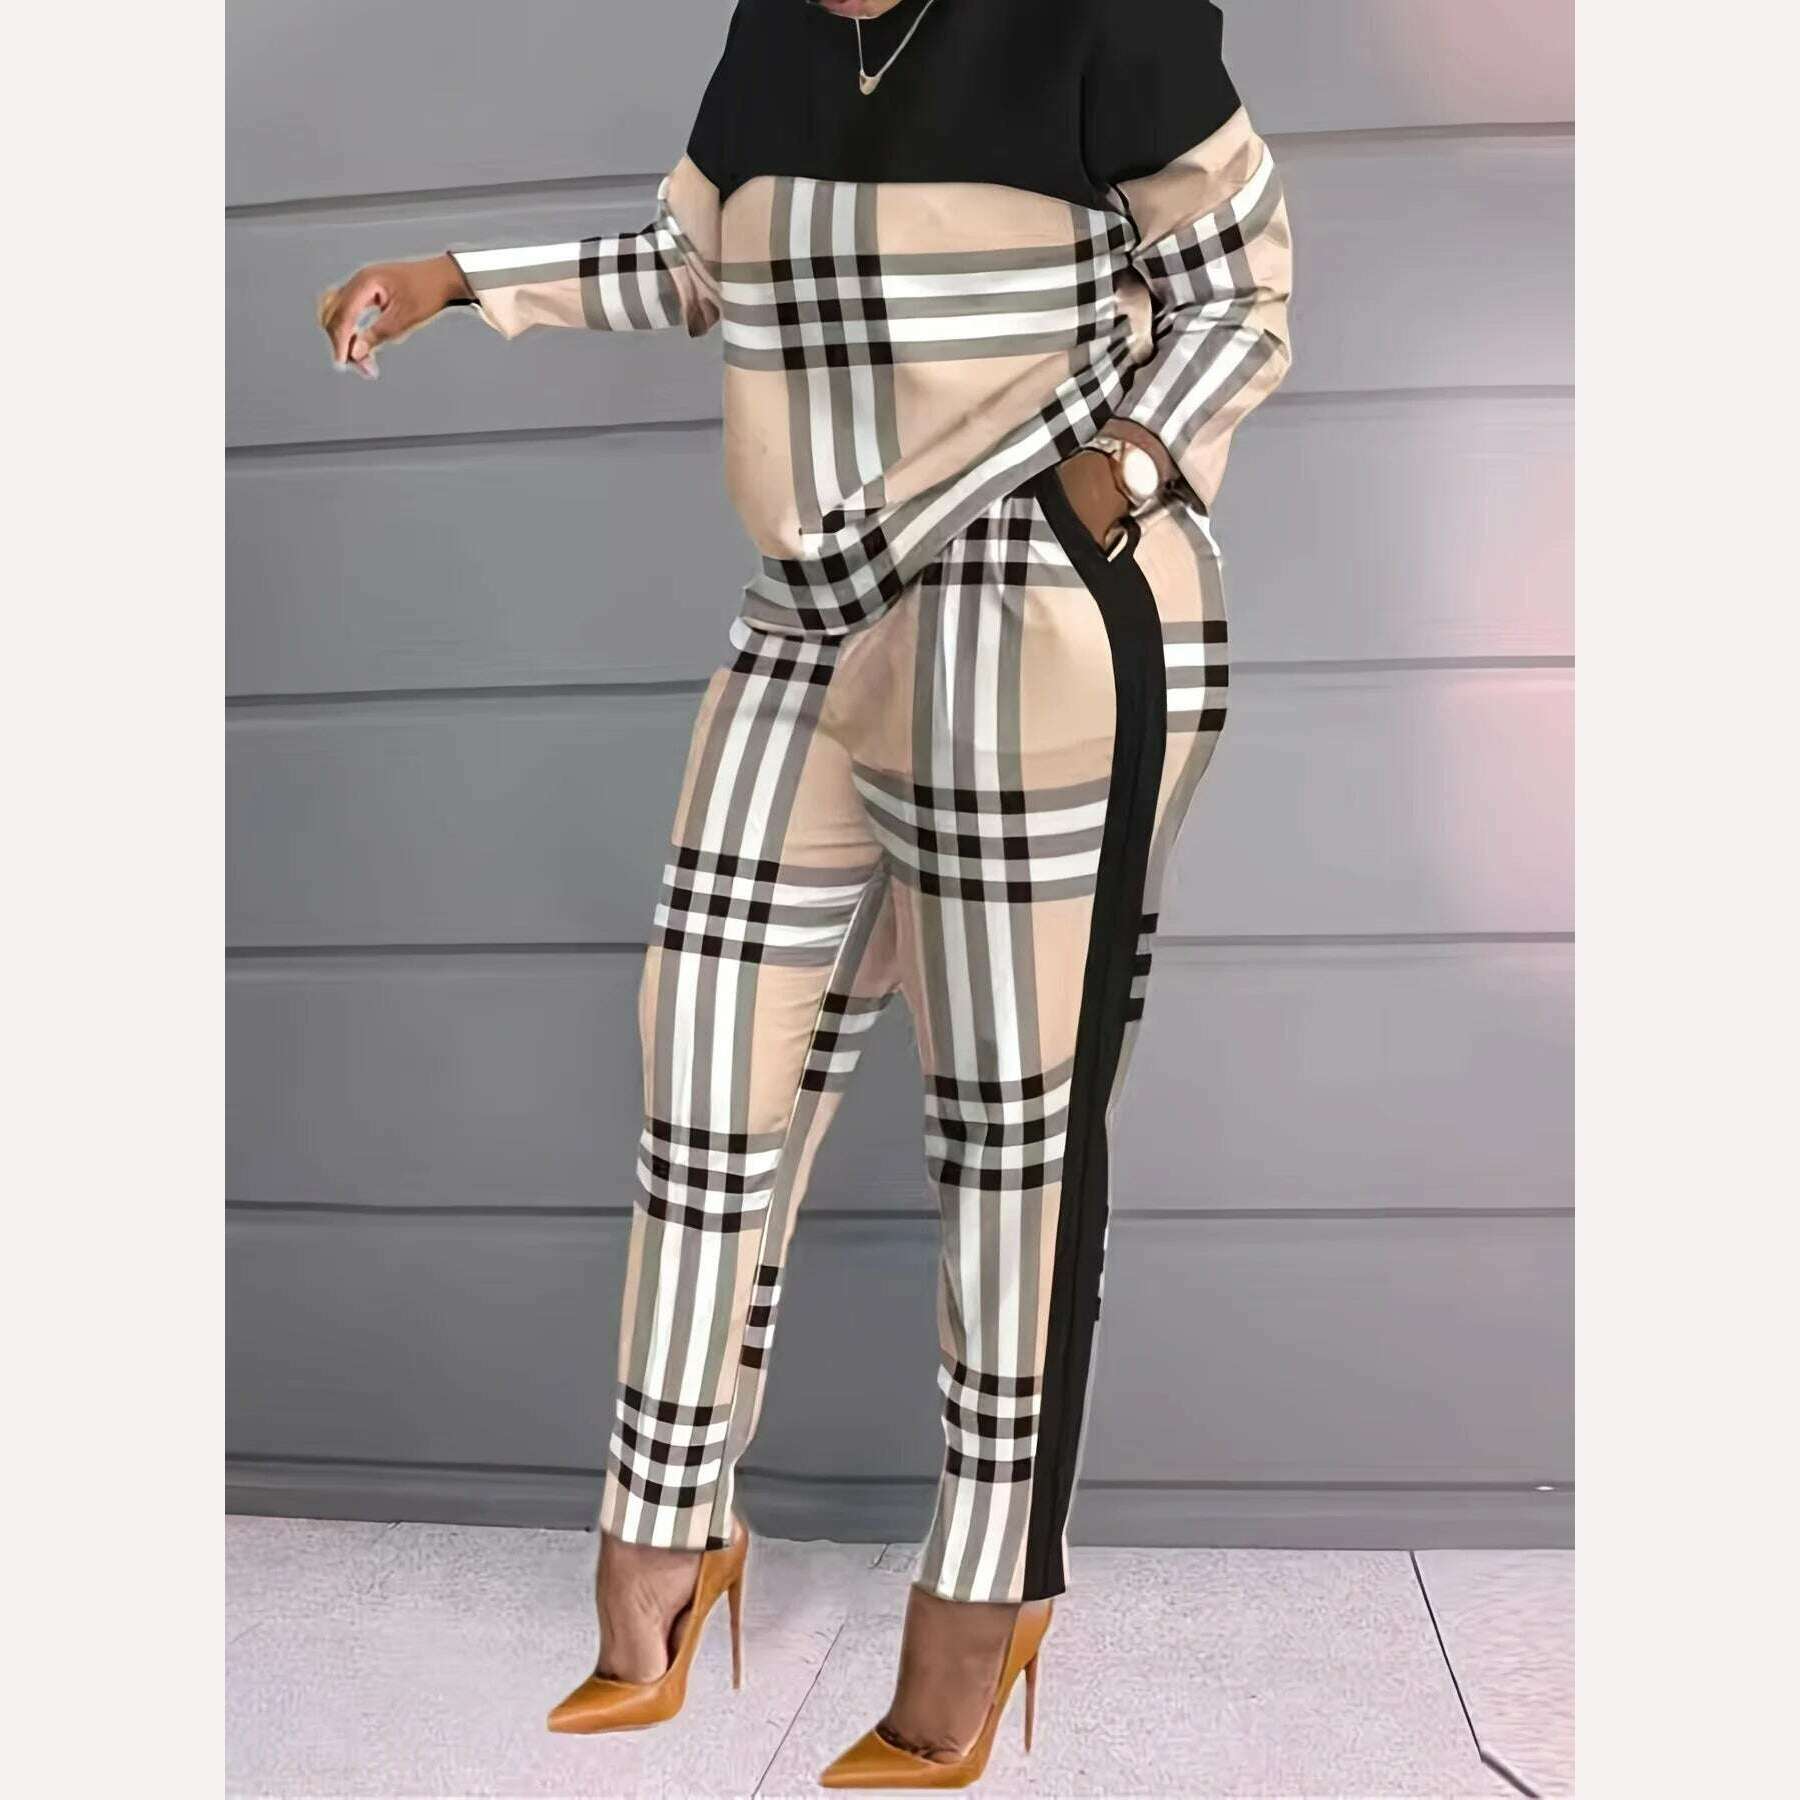 KIMLUD, European And American Fashion Women's Color Contrast Plaid Patchwork Casual Long-sleeved Two-piece Suit, KIMLUD Womens Clothes